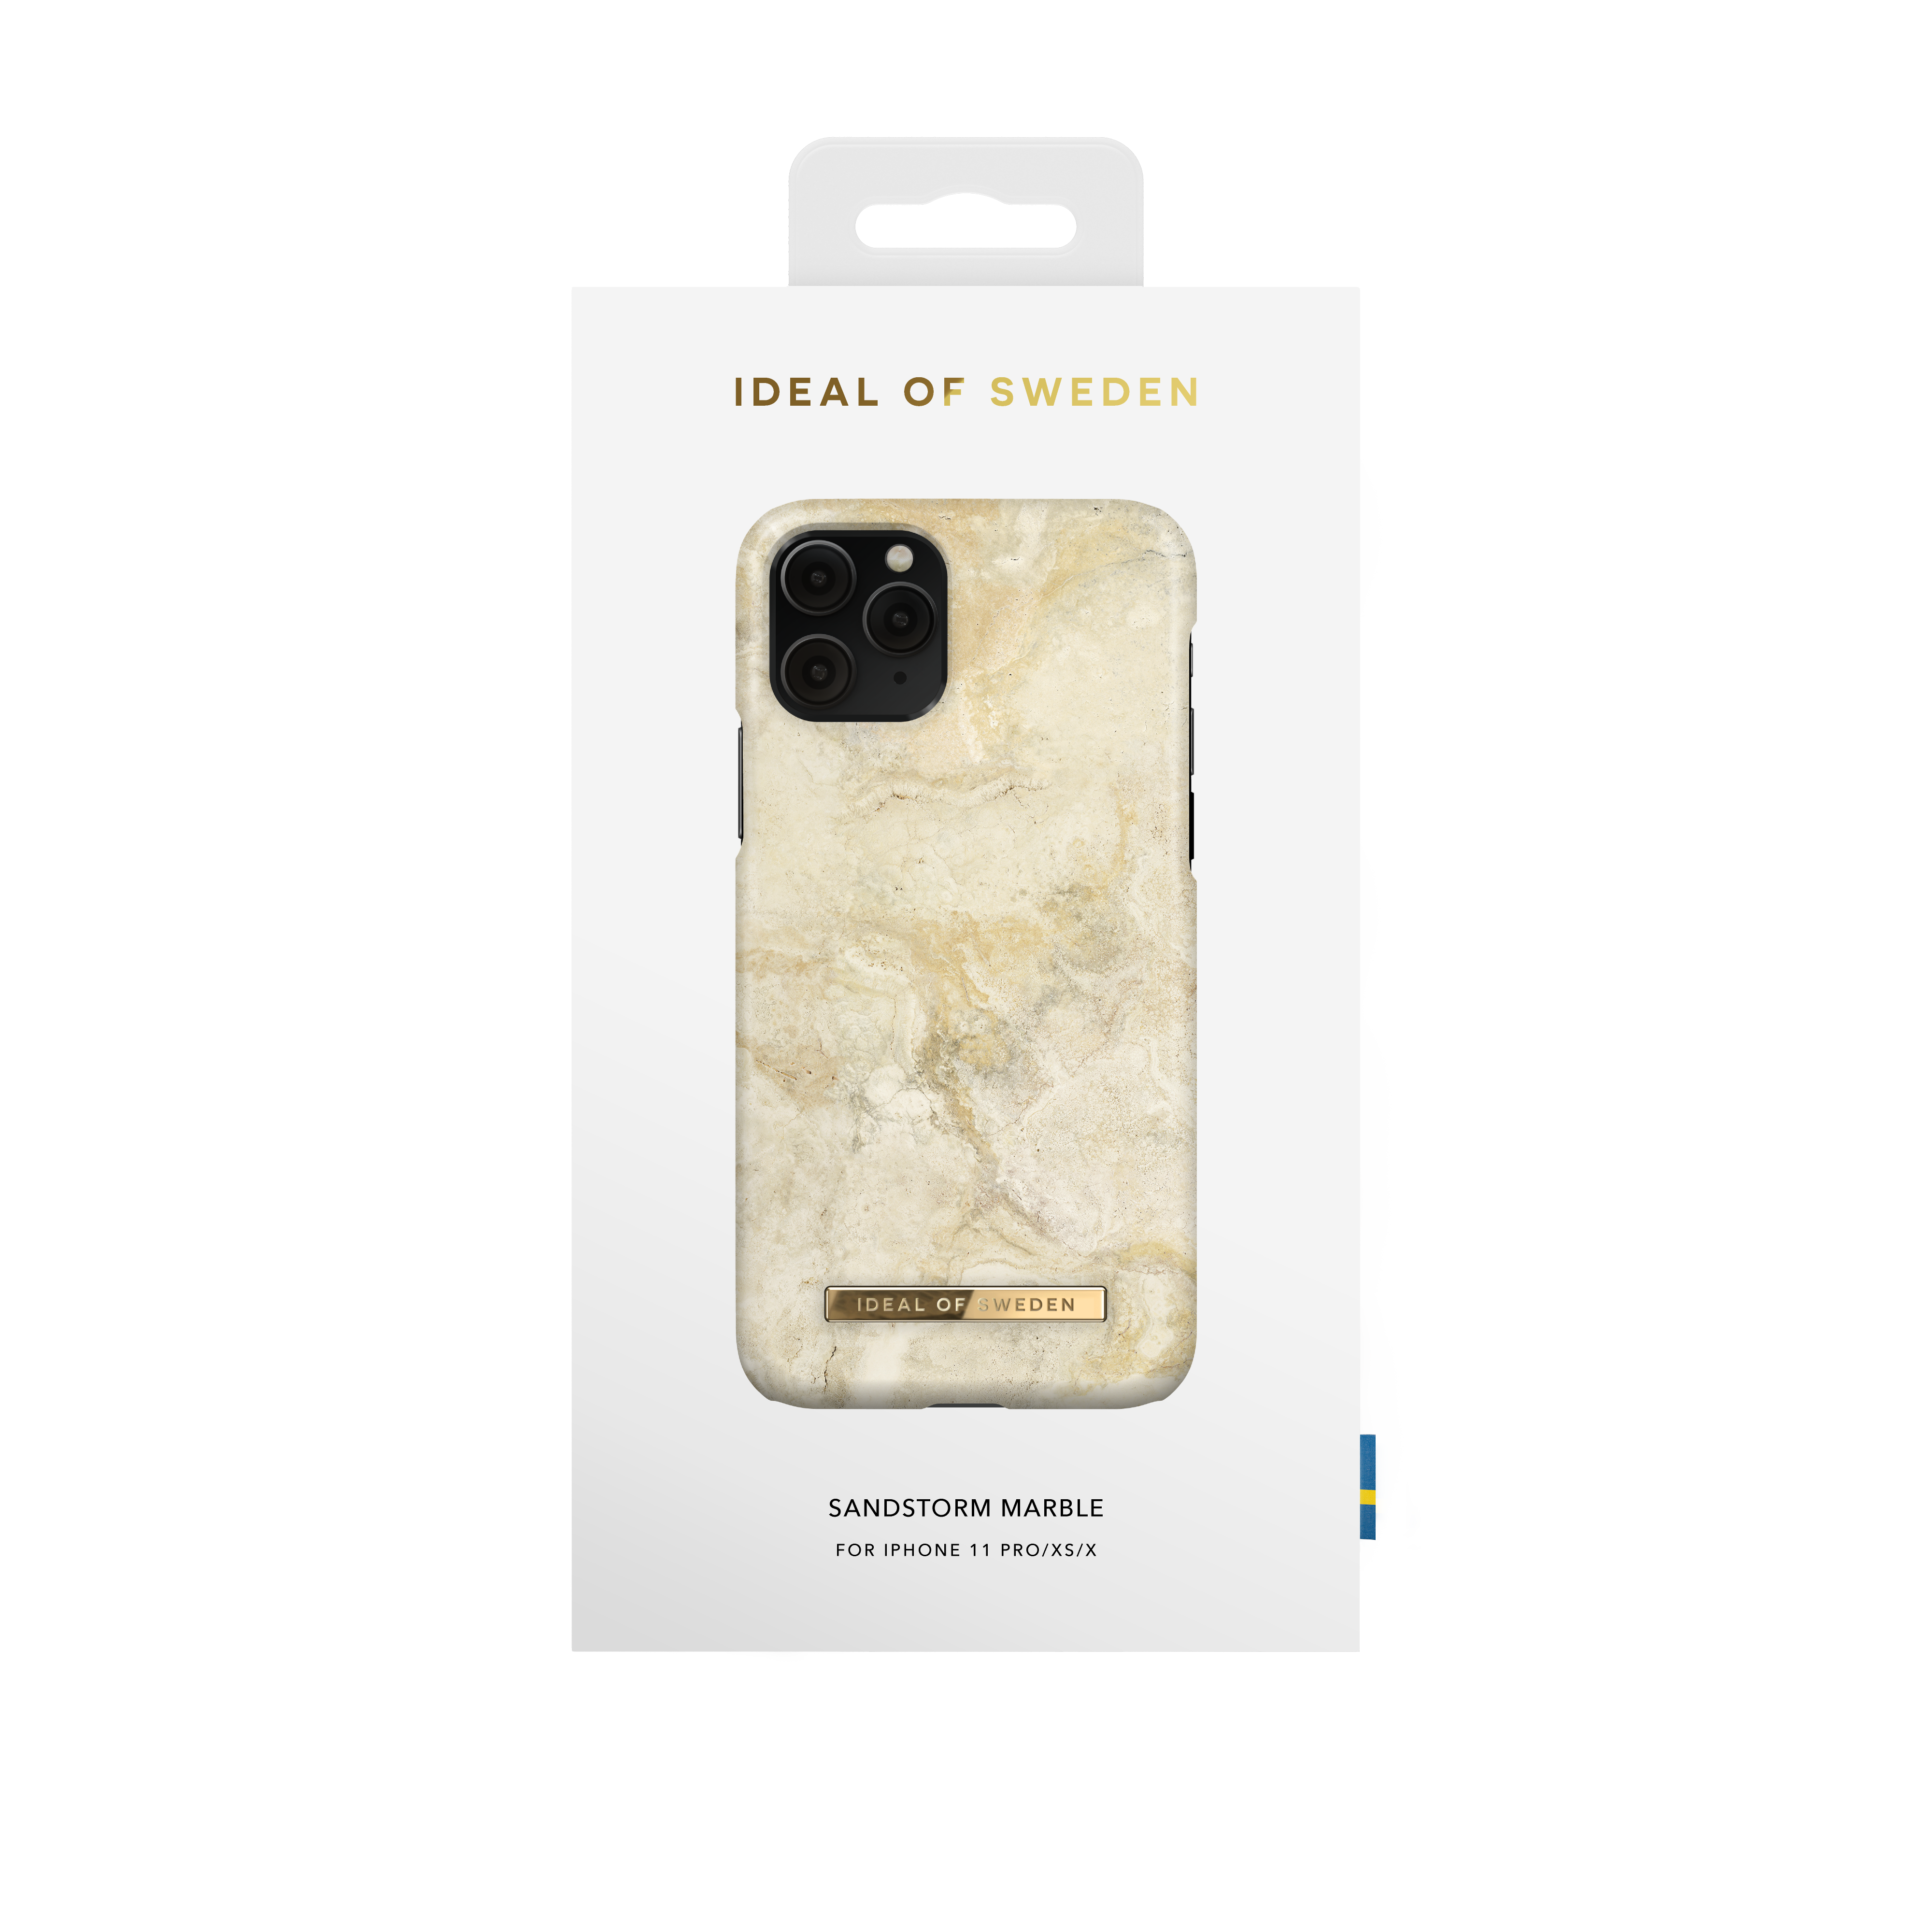 SWEDEN OF Apple, iPhone iPhone Sandstorm IDFCSS20-I1958-195, X, iPhone 11 XS, Pro, Marble Backcover, IDEAL